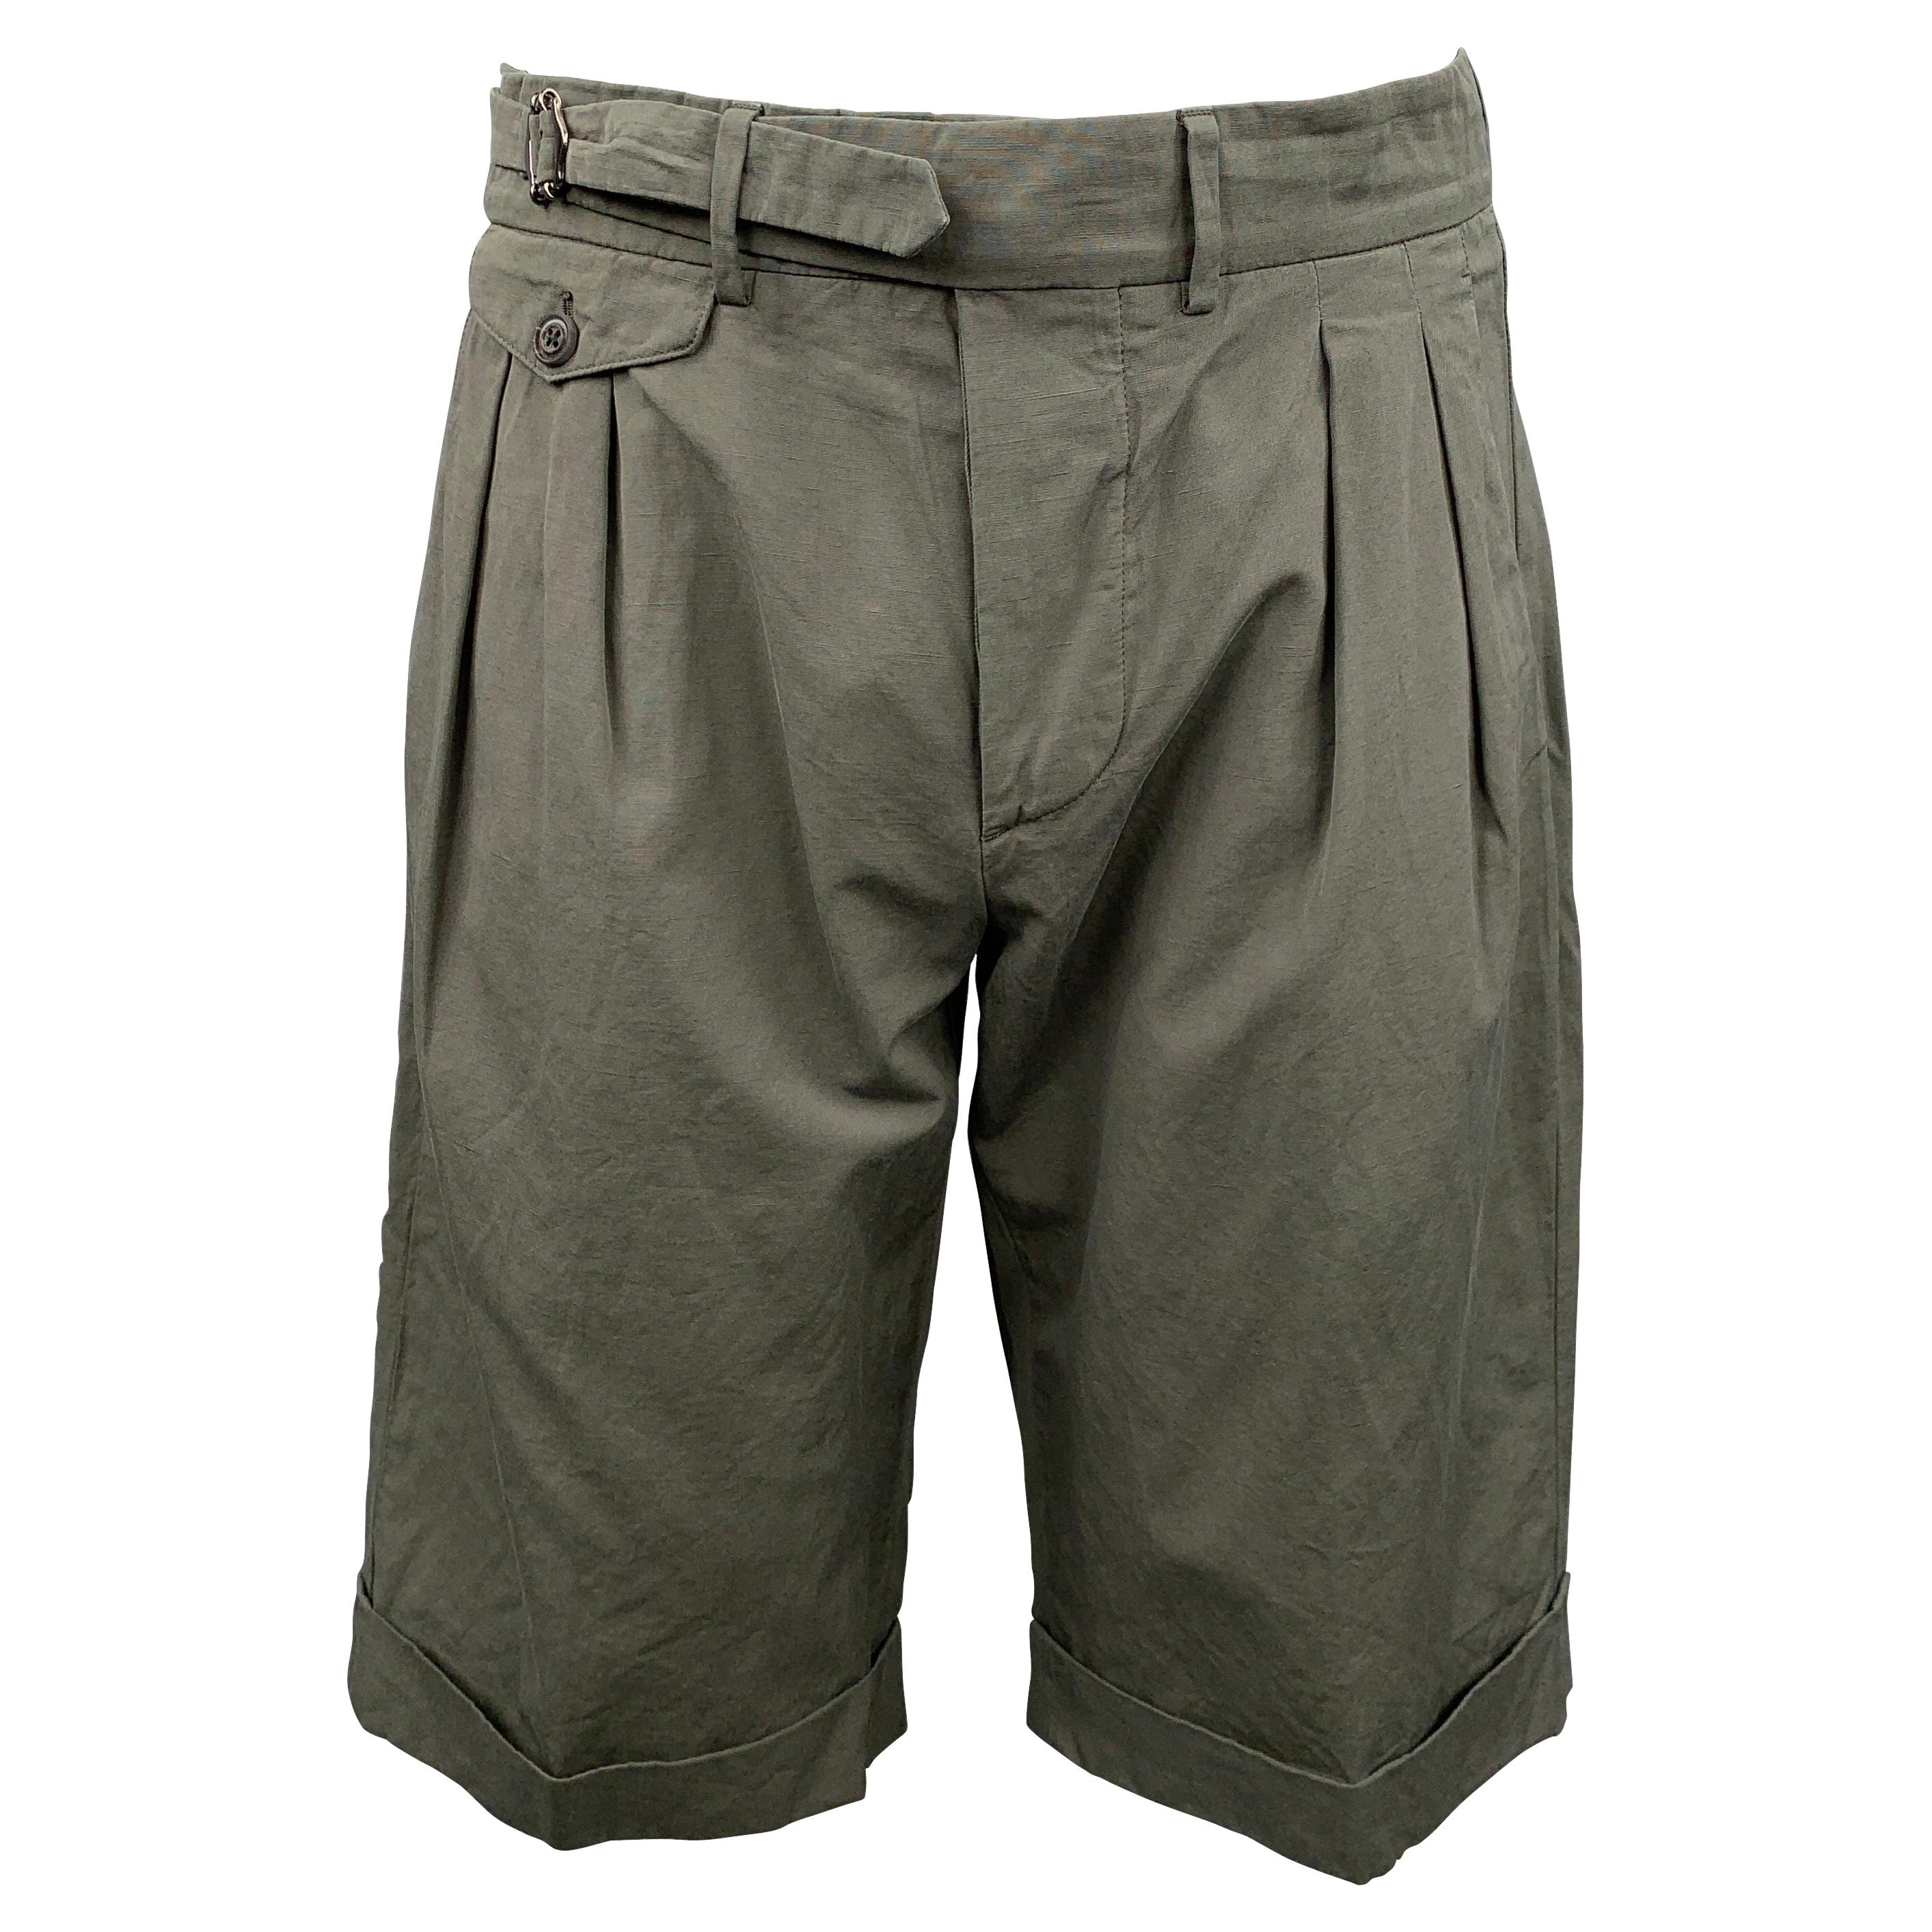 WOOSTER + LARDINI Size 32 Olive Cotton Blend Button Fly Shorts